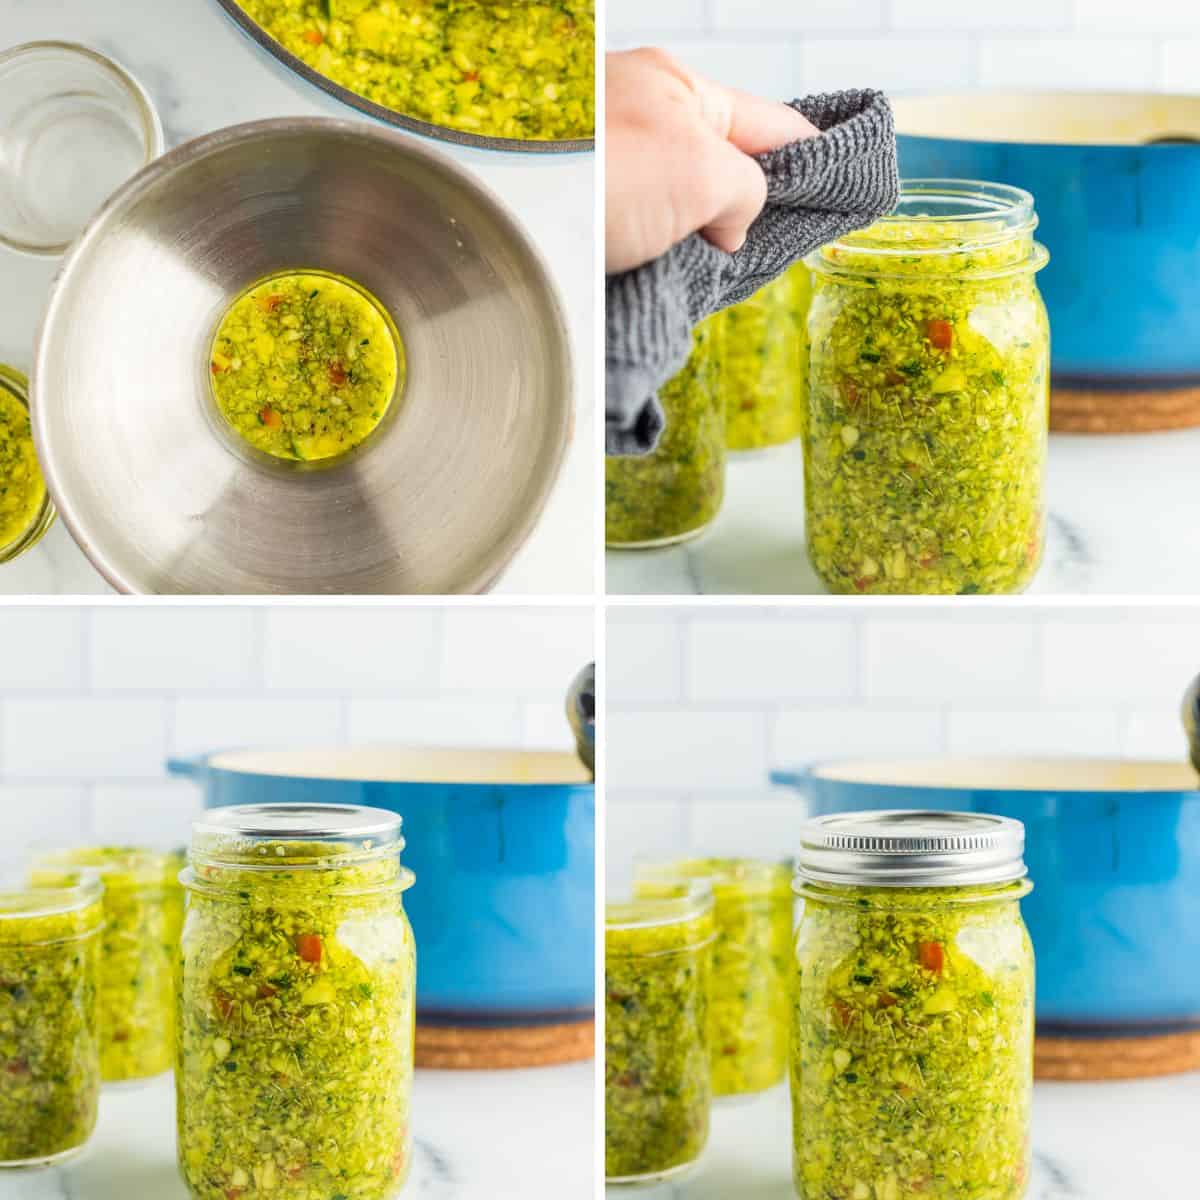 4 photos showing step by step how to jar zucchini relish.